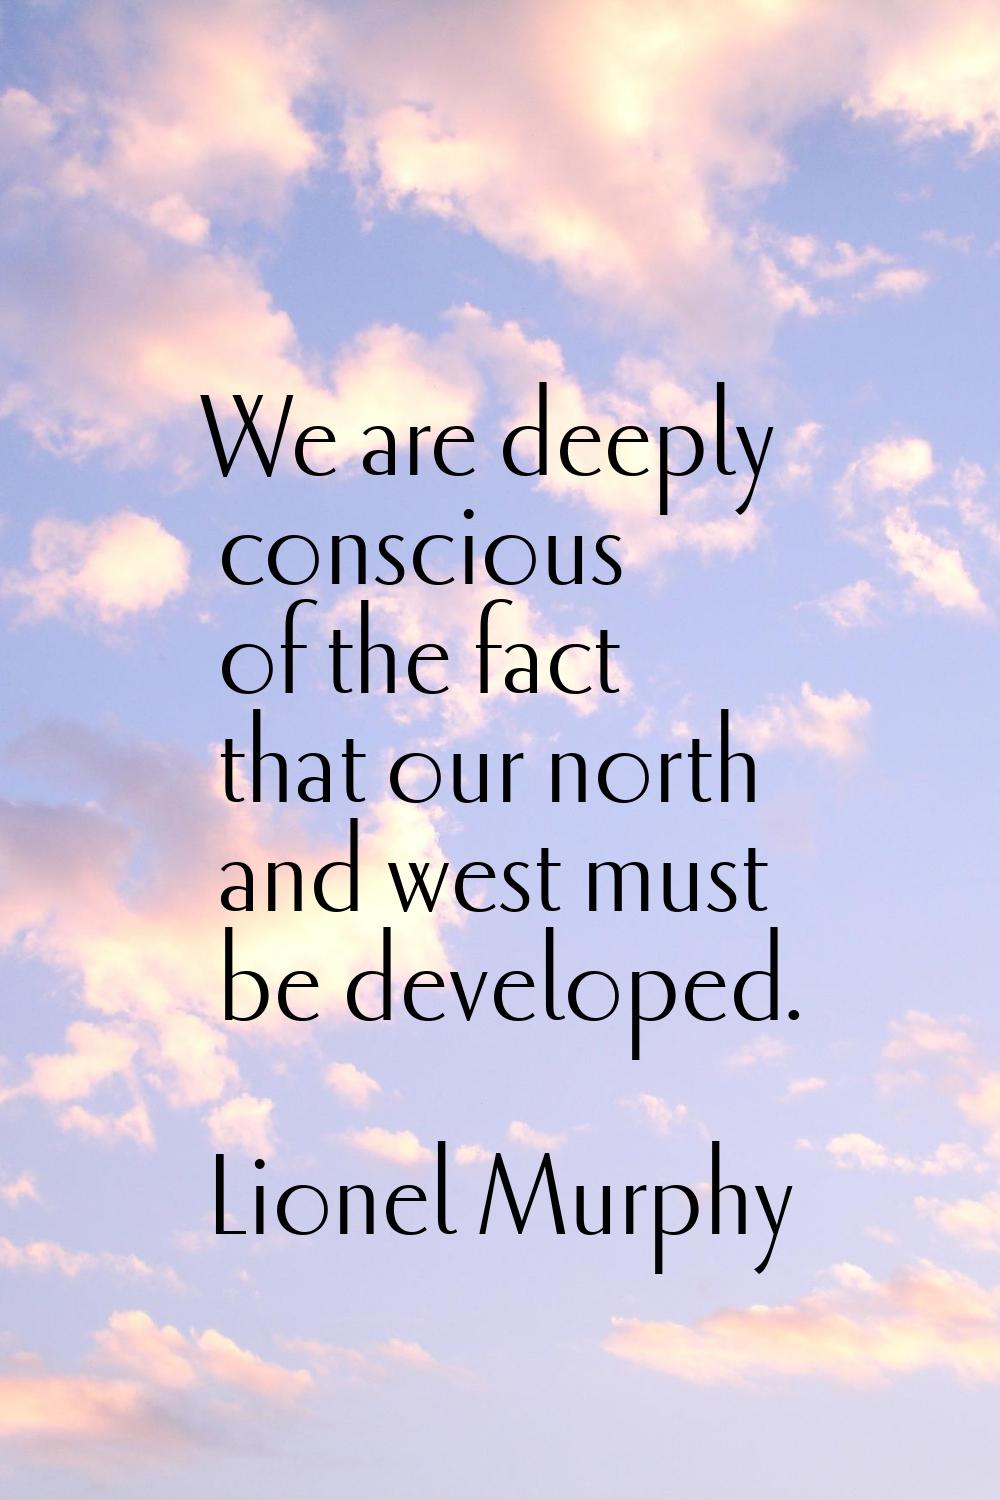 We are deeply conscious of the fact that our north and west must be developed.